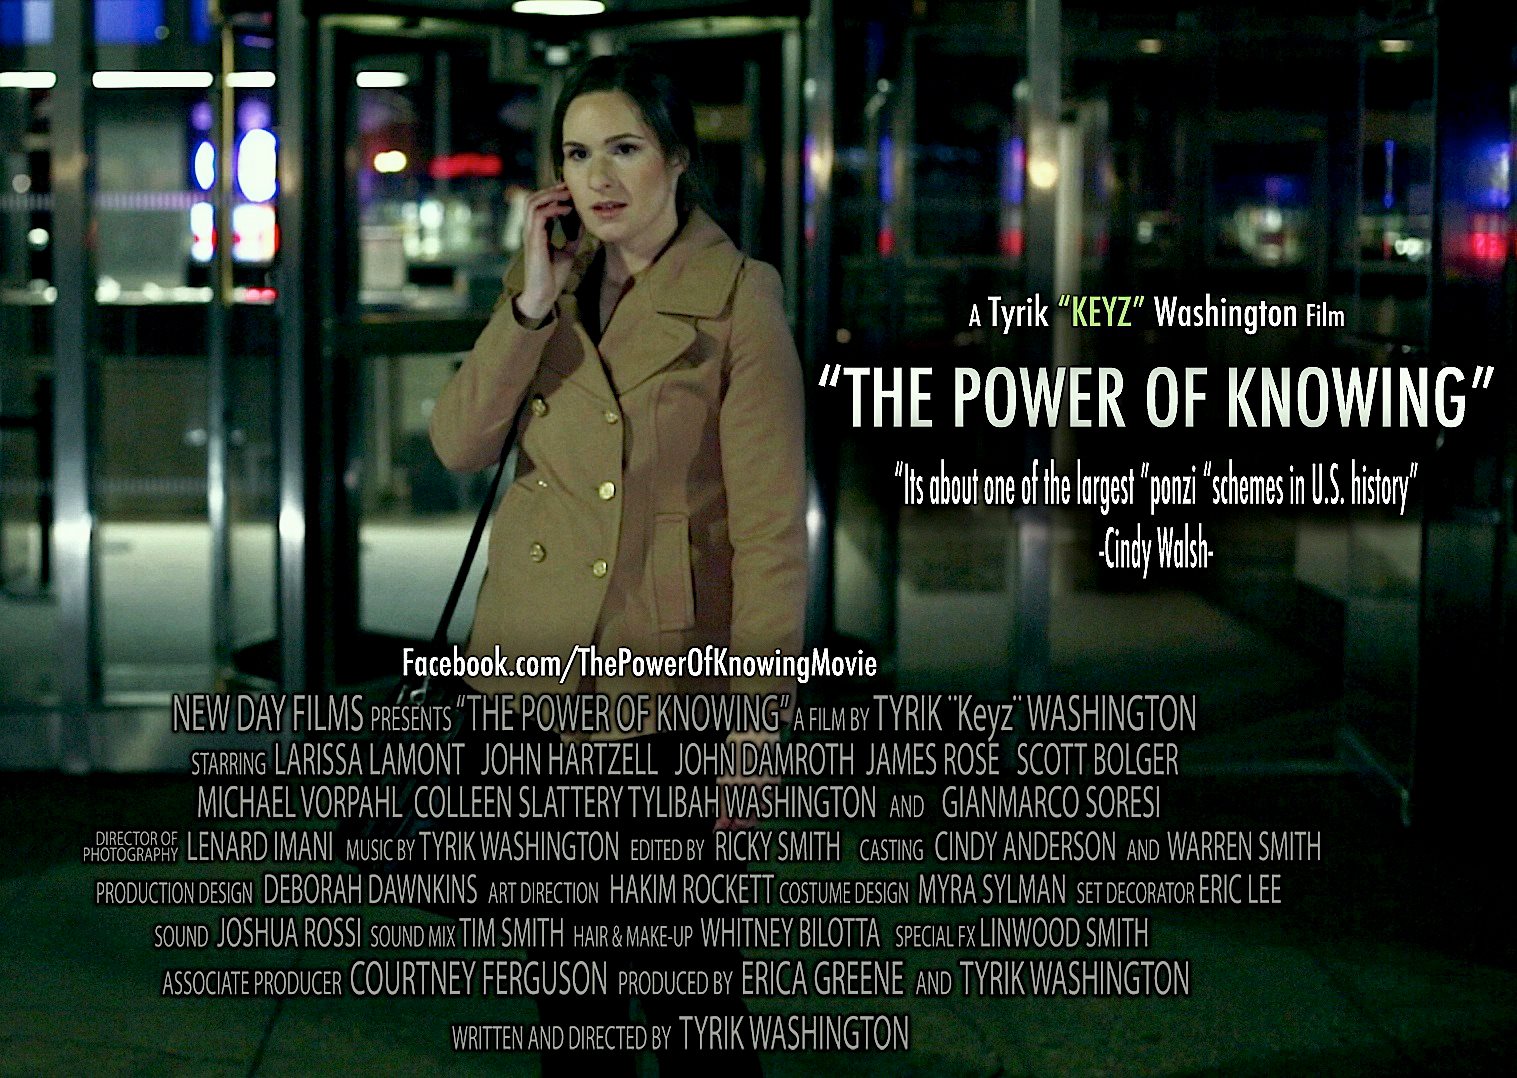 Web Poster for The Power of Knowing.